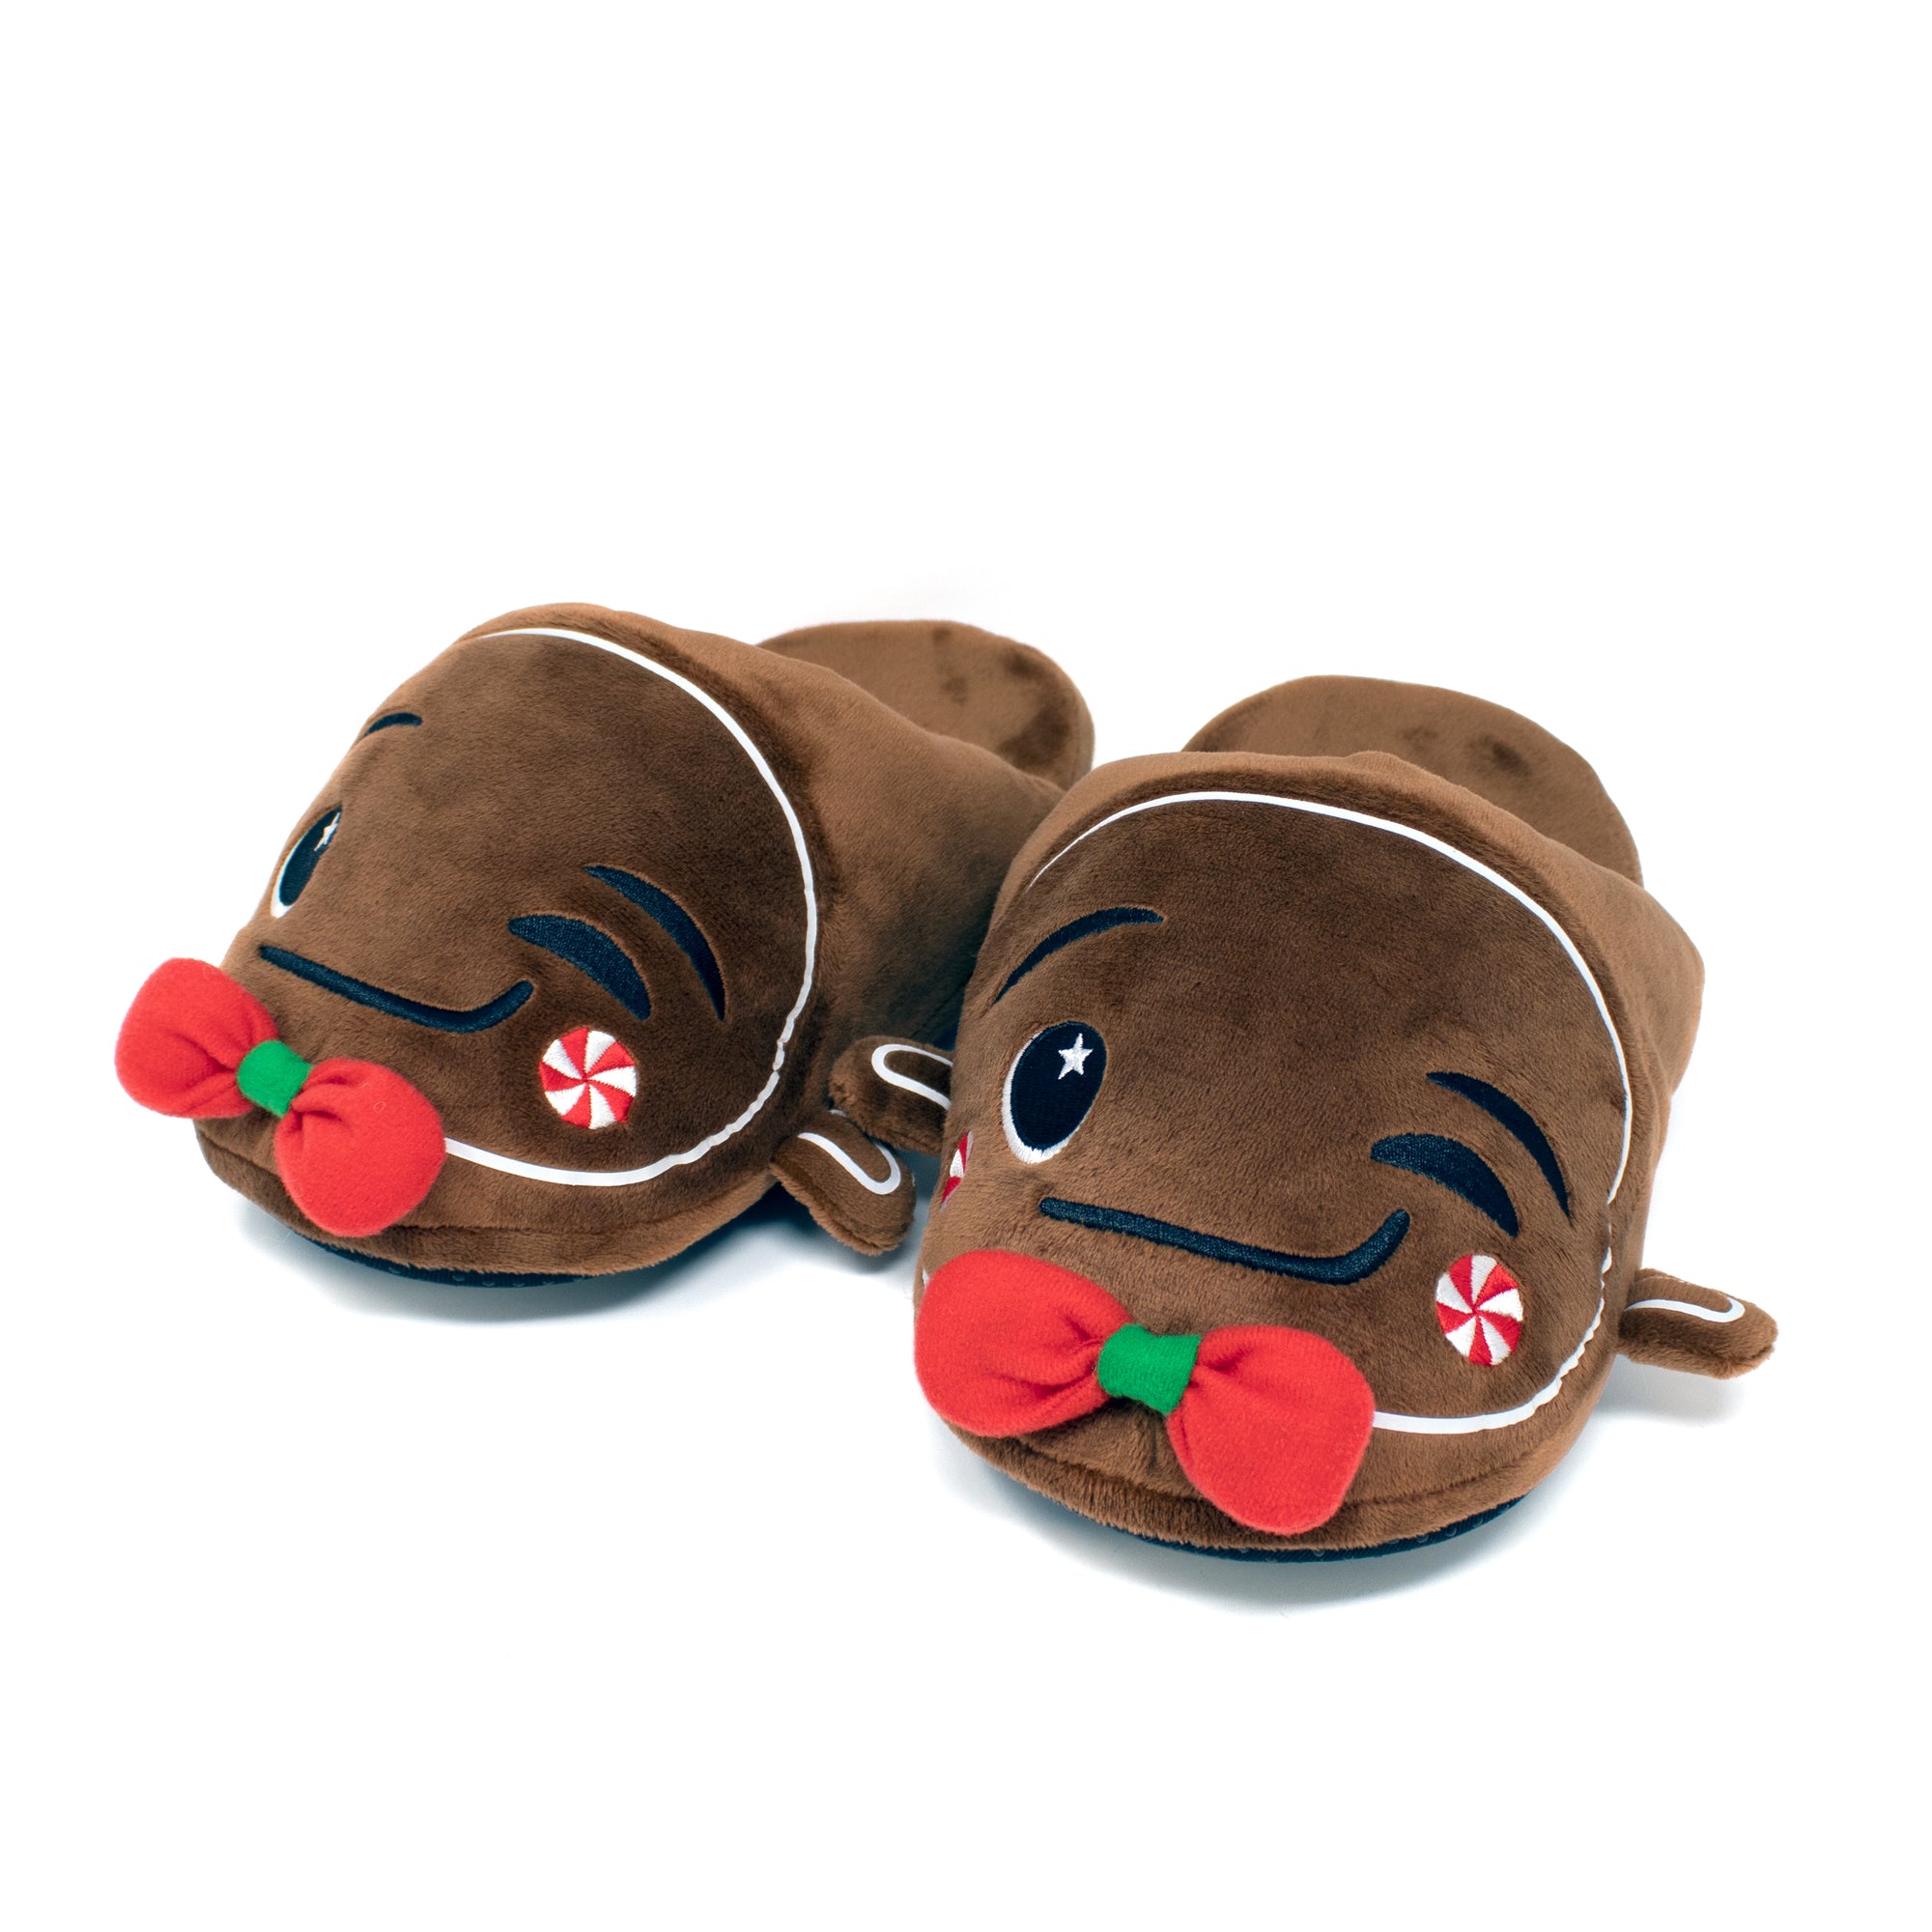 Gingersnaps the Gingerbread Slippers